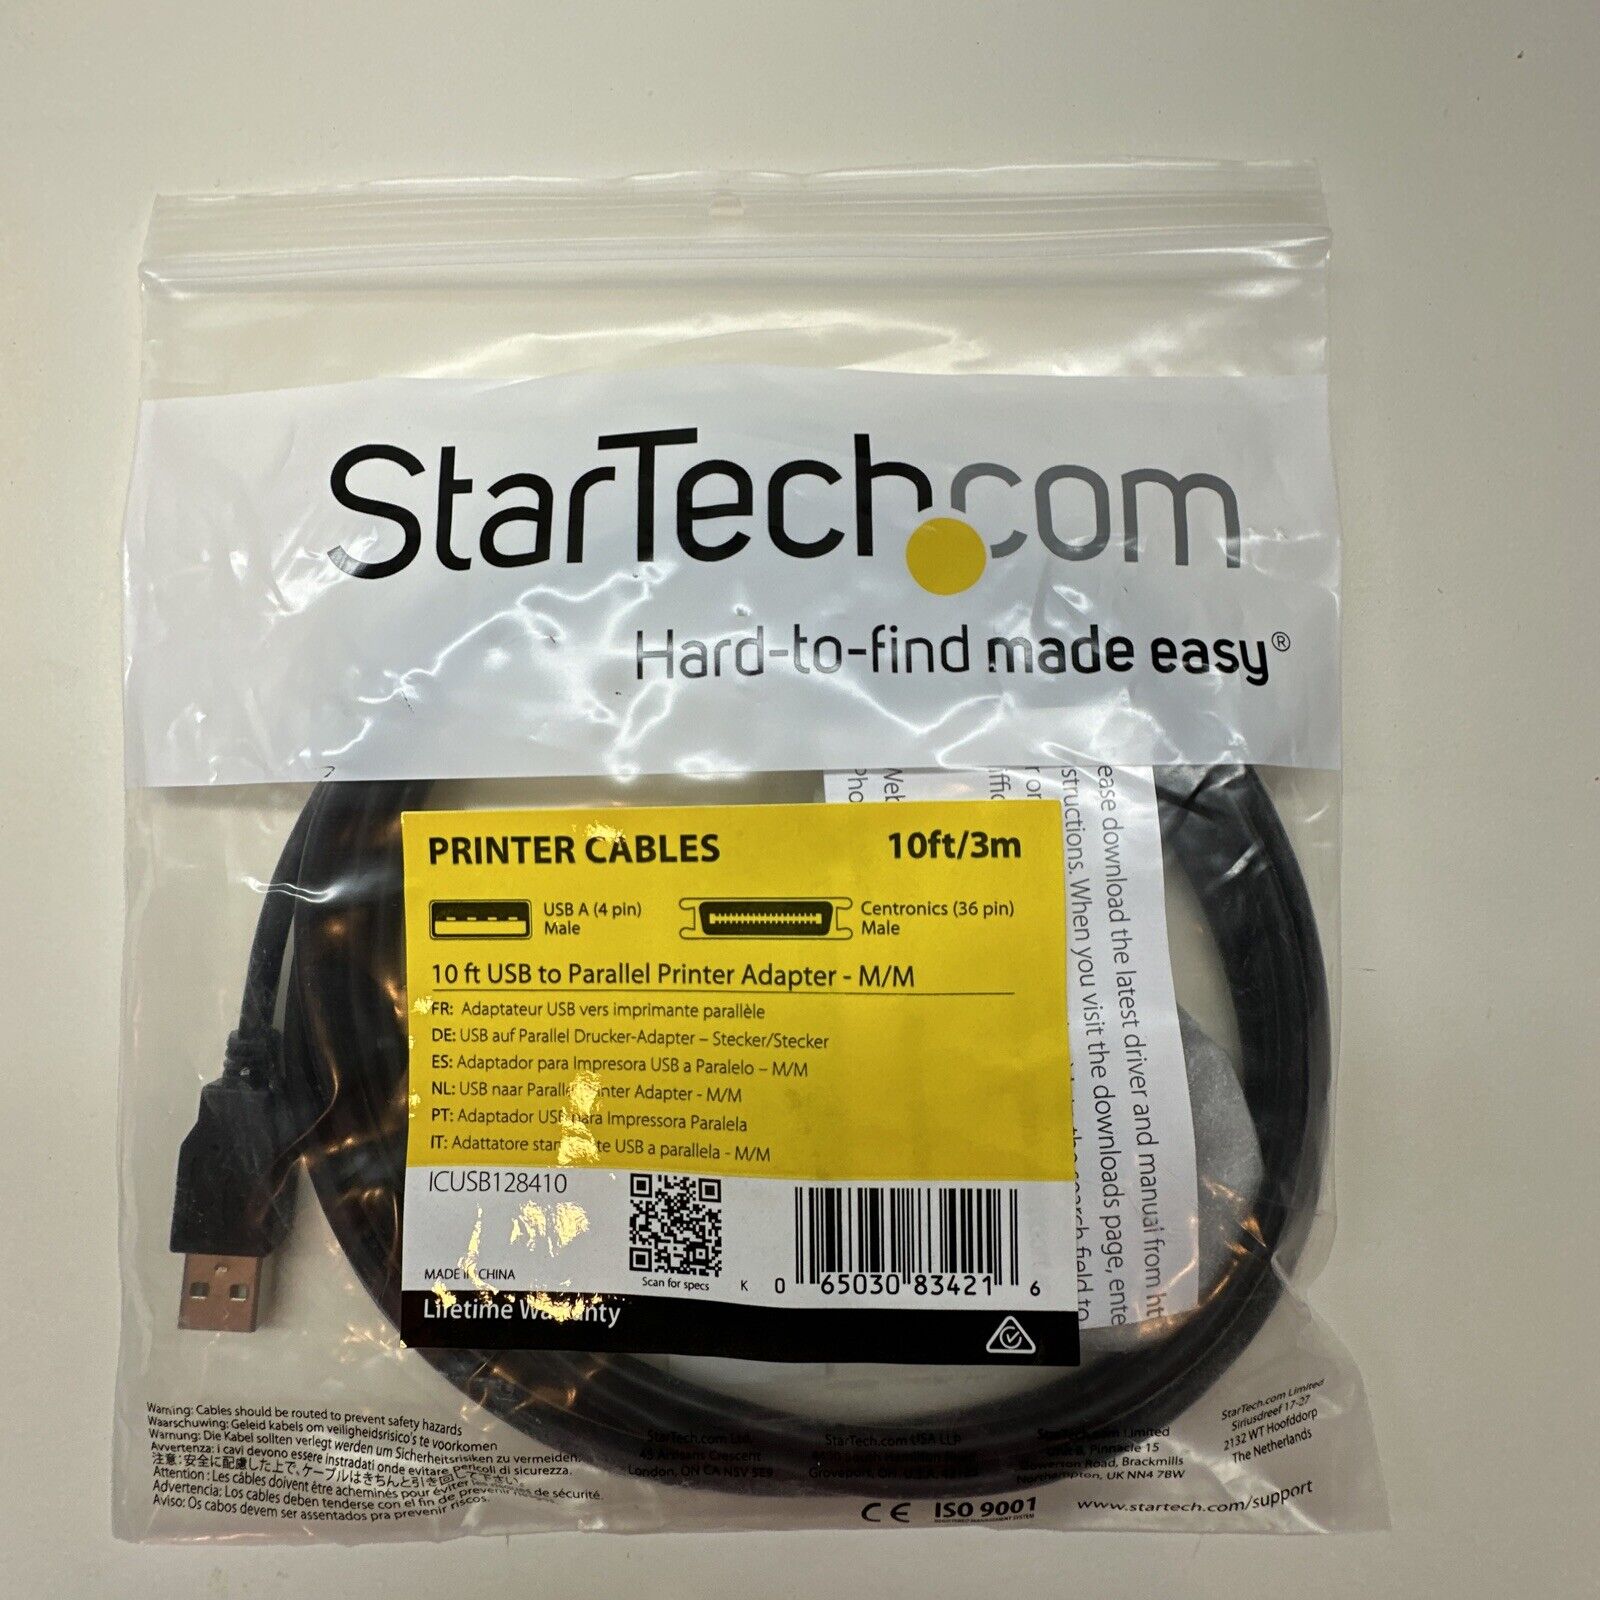 StarTech.com Model ICUSB128410 10 ft. USB to Parallel Printer Adapter